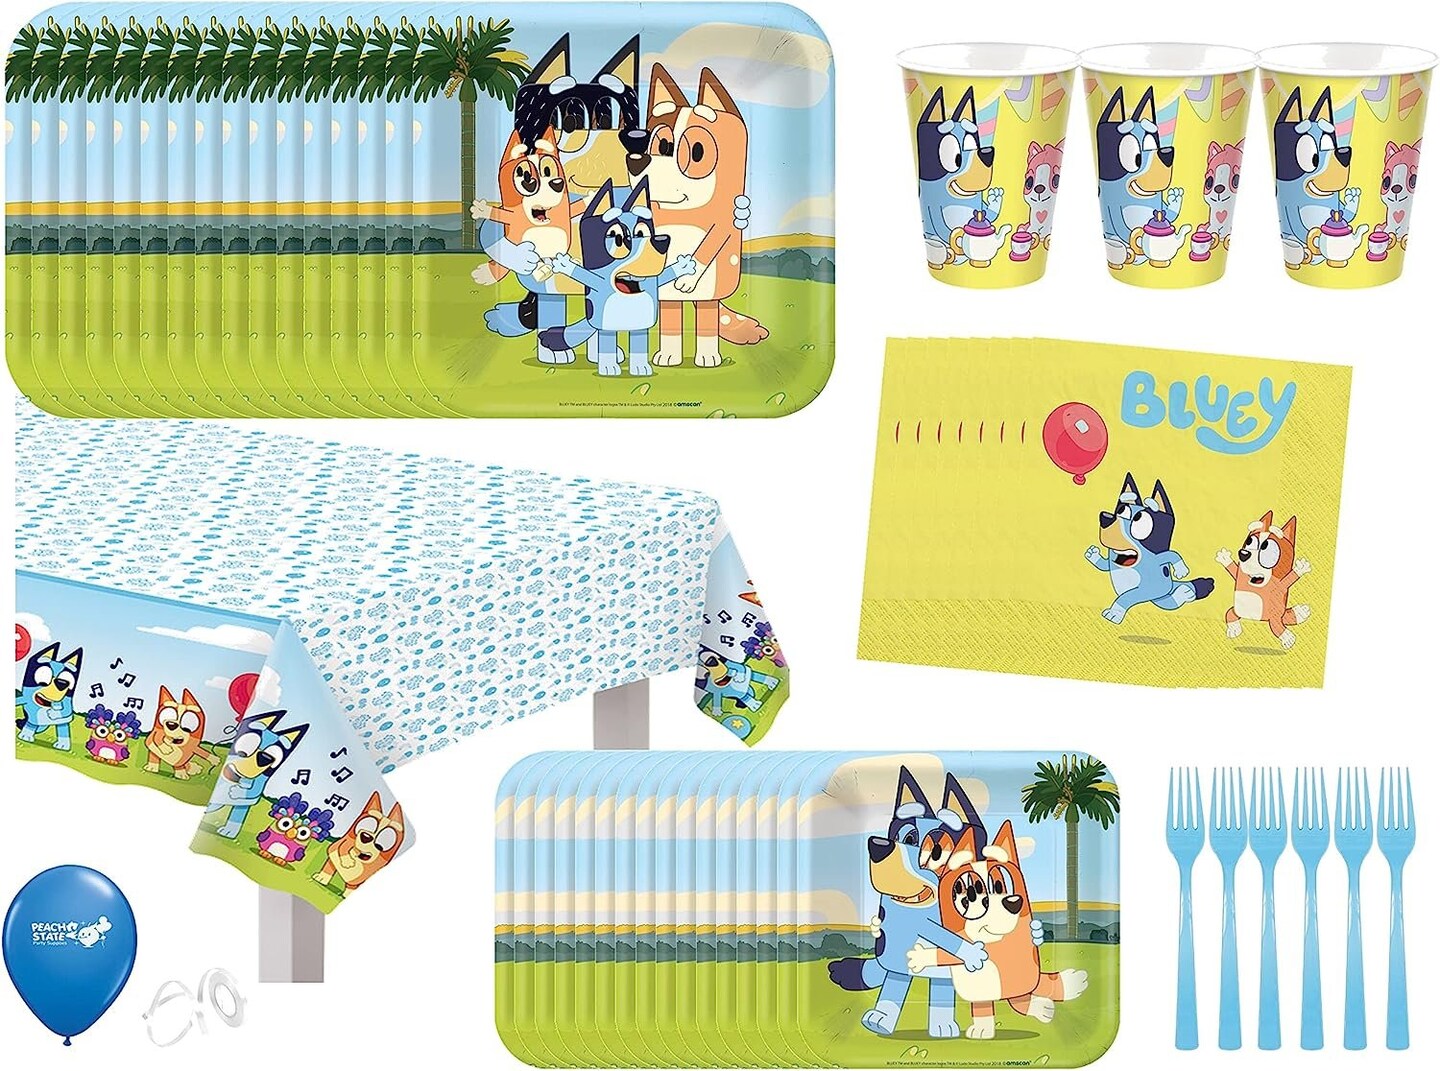 Bluey Birthday Party Supplies | Bluey Party Decorations | Bluey Party Supplies | Bluey Birthday Decorations | | With Bluey Tablecover, Bluey Plates, Bluey Cups, Bluey Napkins, and Forks - Serves 16 Guests (Pack for 16)